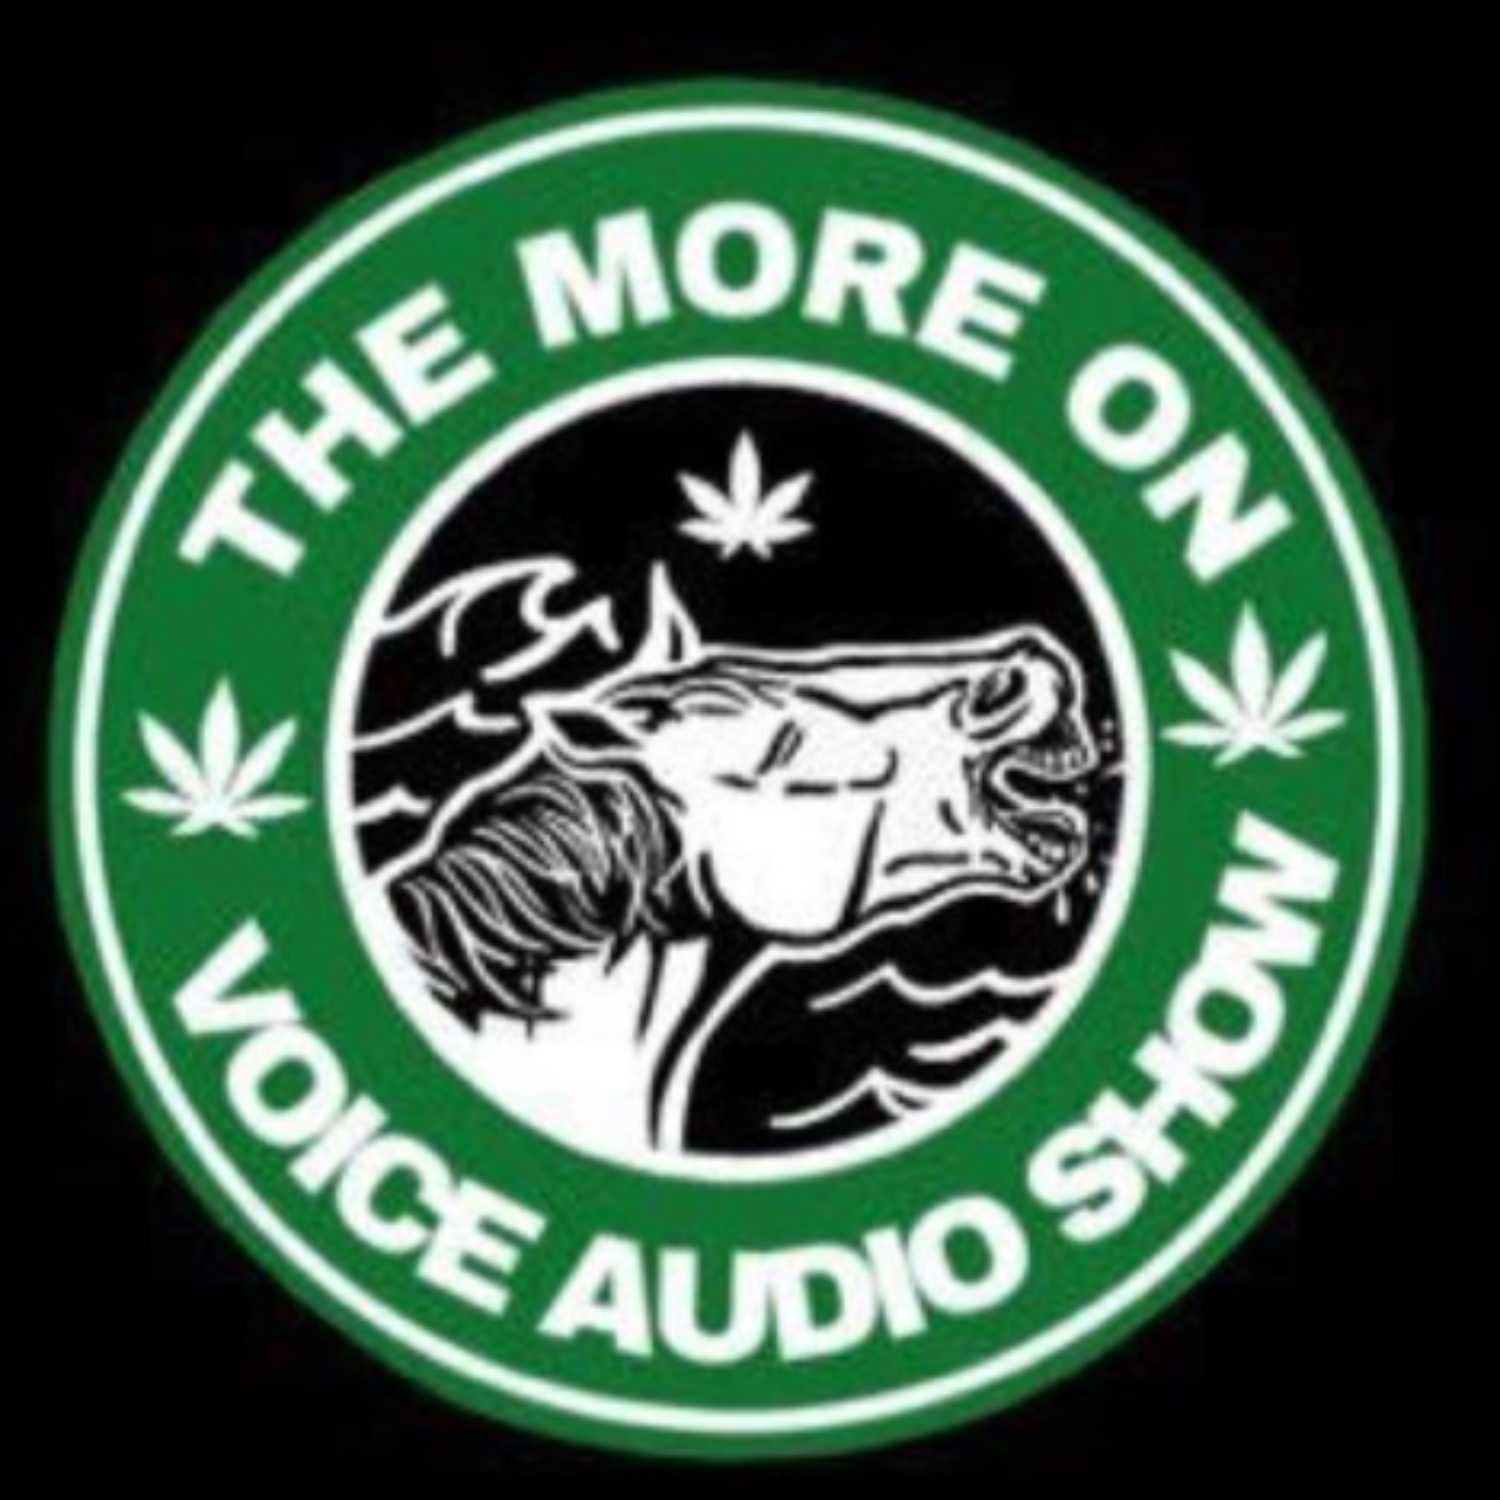 The More On Voice Audio Show: Episode 52 (Cody Jayne)